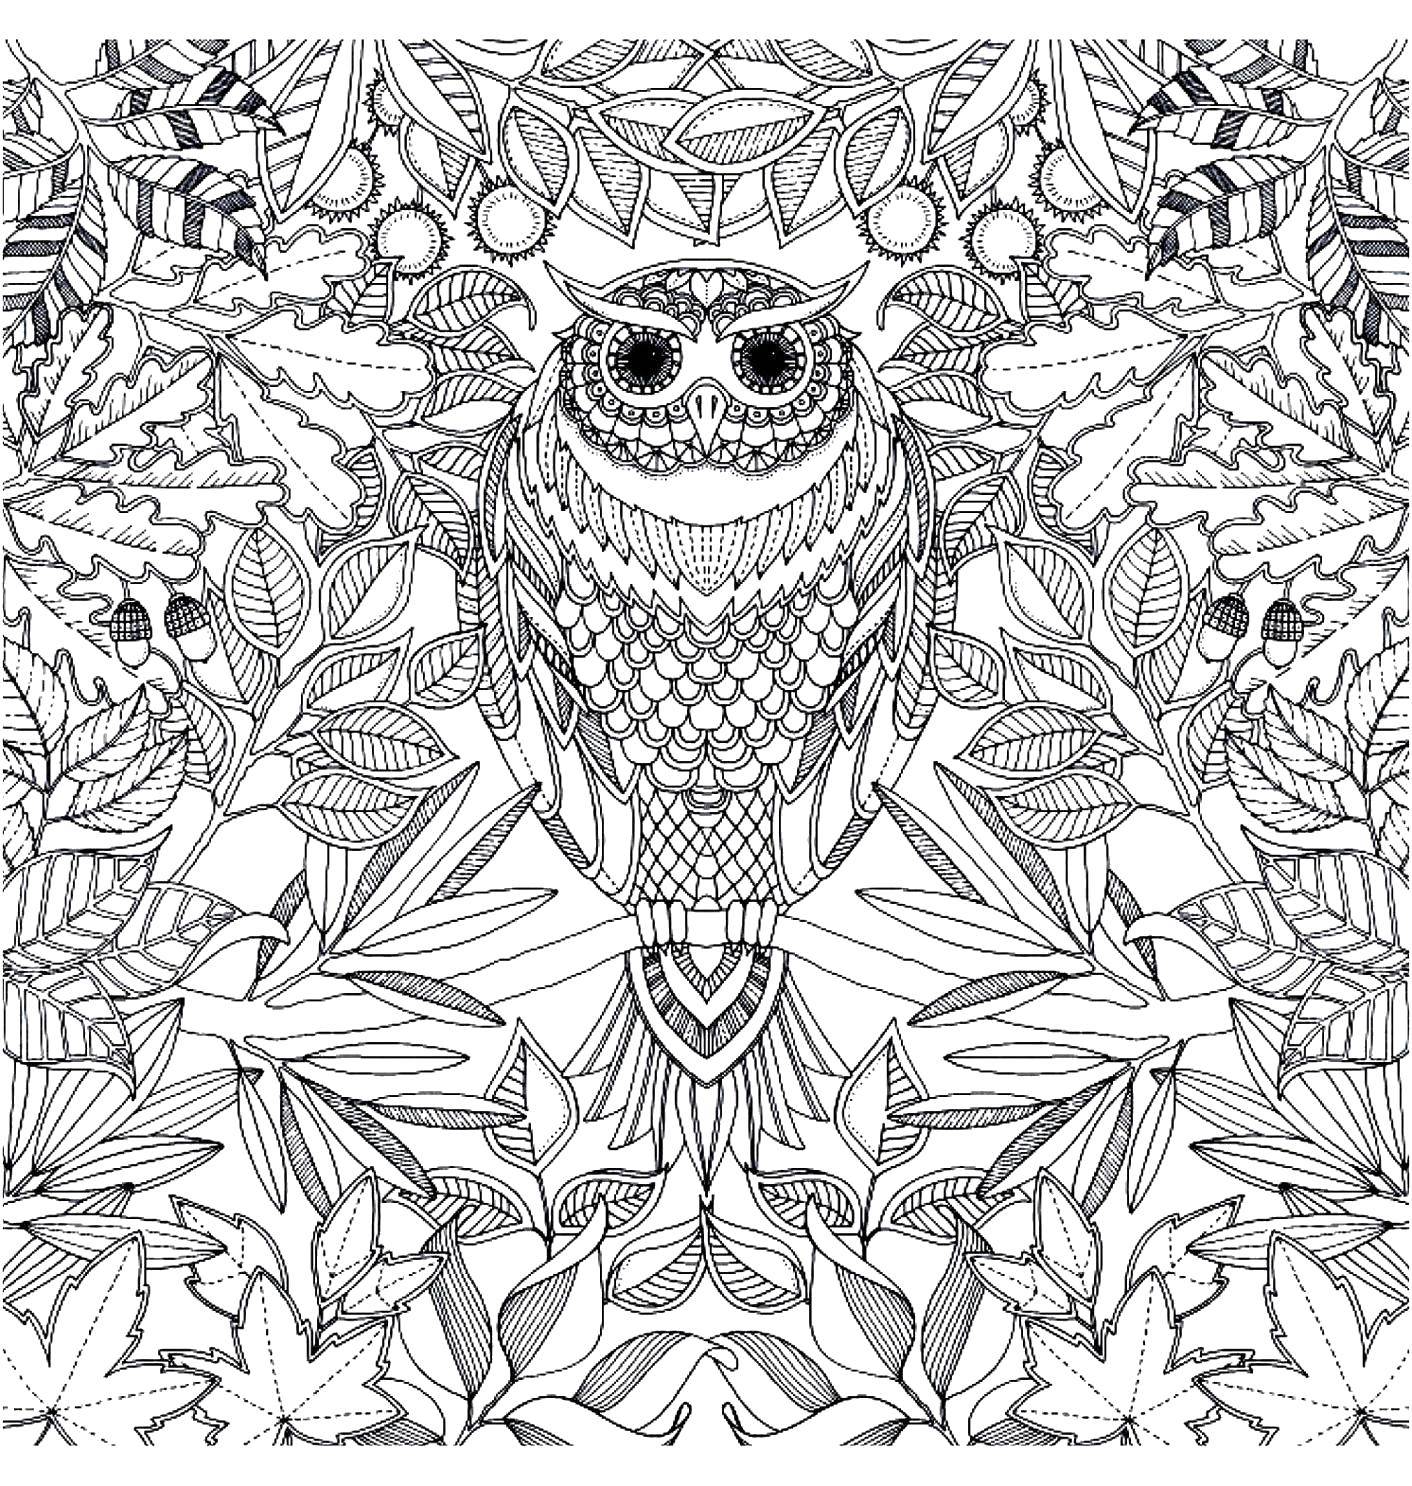 Coloring Ethnic owl. Category patterns. Tags:  Patterns, ethnic.